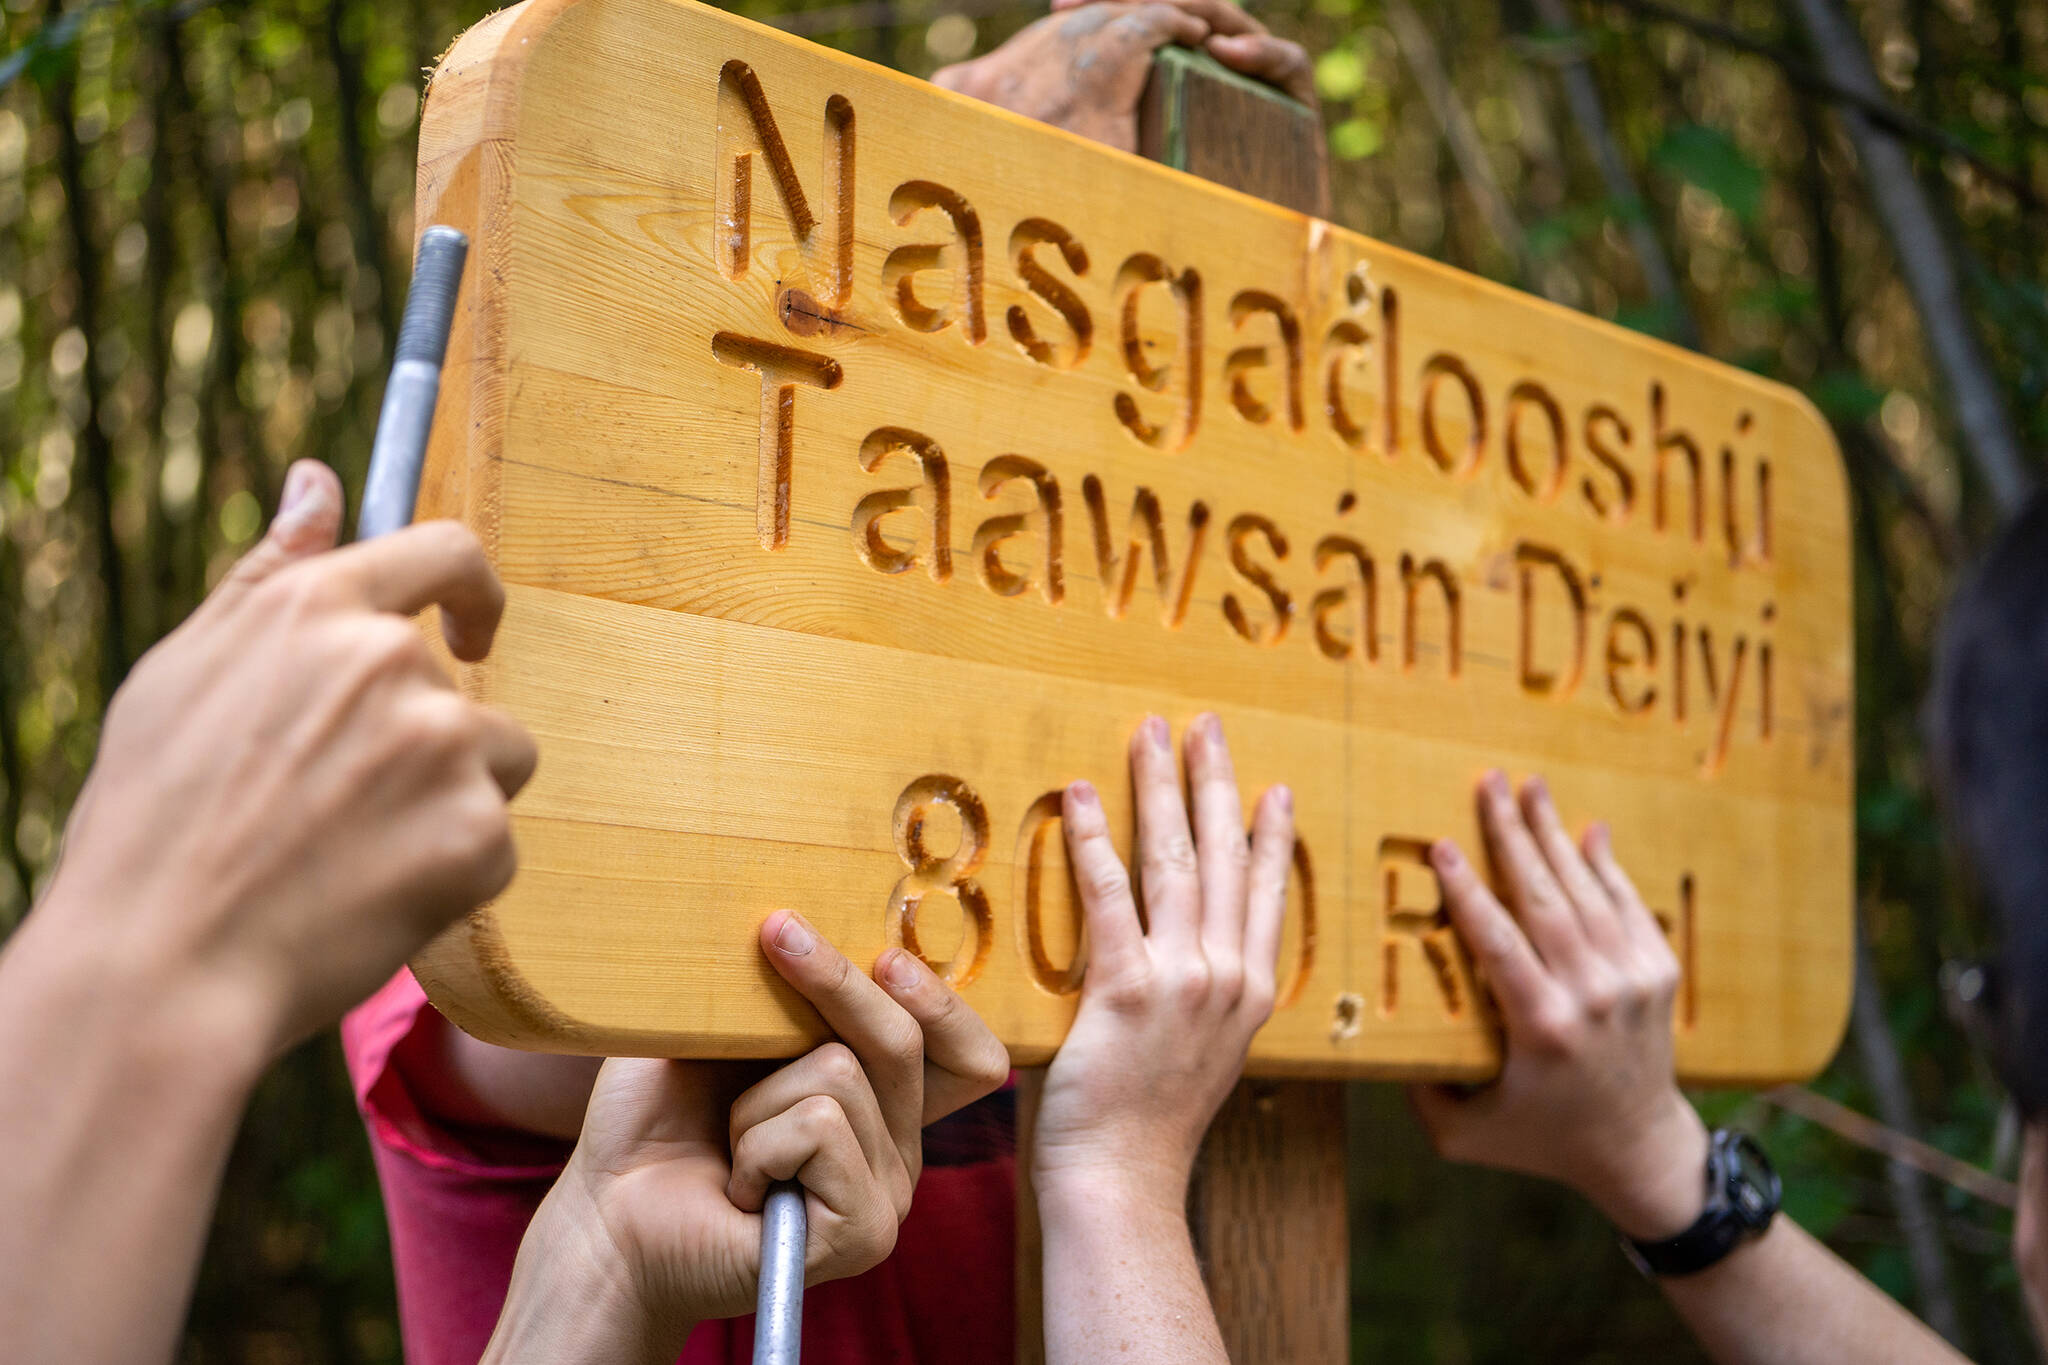 Many hands help to get the work done. Participants of the Alaska Youth Stewards program in Kake install a Lingít/English road sign, a project in partnership with community elders and the U.S. Forest Service.